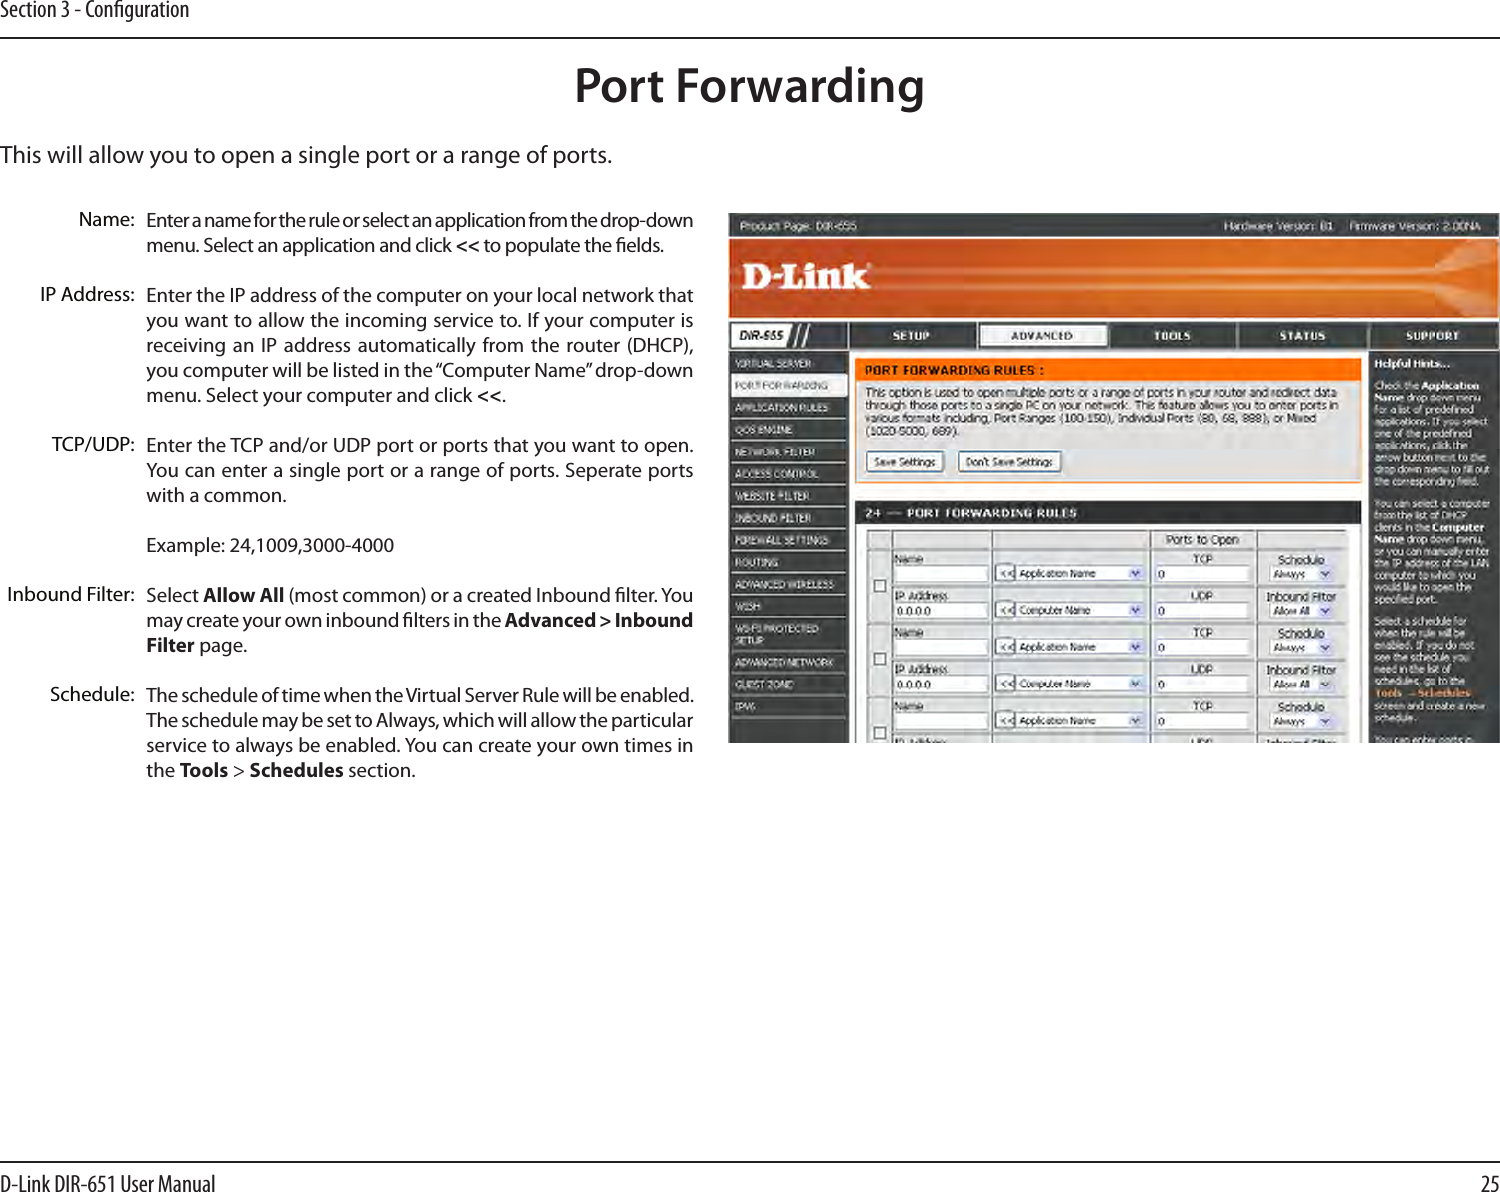 25D-Link DIR-651 User ManualSection 3 - CongurationThis will allow you to open a single port or a range of ports.Port ForwardingEnter a name for the rule or select an application from the drop-down menu. Select an application and click &lt;&lt; to populate the elds.Enter the IP address of the computer on your local network that you want to allow the incoming service to. If your computer is receiving an IP  address automatically from the  router (DHCP), you computer will be listed in the “Computer Name” drop-down menu. Select your computer and click &lt;&lt;. Enter the TCP and/or UDP port or ports that you want to open. You can enter a single port or a range of ports. Seperate ports with a common.Example: 24,1009,3000-4000Select Allow All (most common) or a created Inbound lter. You may create your own inbound lters in the Advanced &gt; Inbound Filter page.The schedule of time when the Virtual Server Rule will be enabled. The schedule may be set to Always, which will allow the particular service to always be enabled. You can create your own times in the Tools &gt; Schedules section.Name:IP Address:TCP/UDP:Inbound Filter:Schedule: